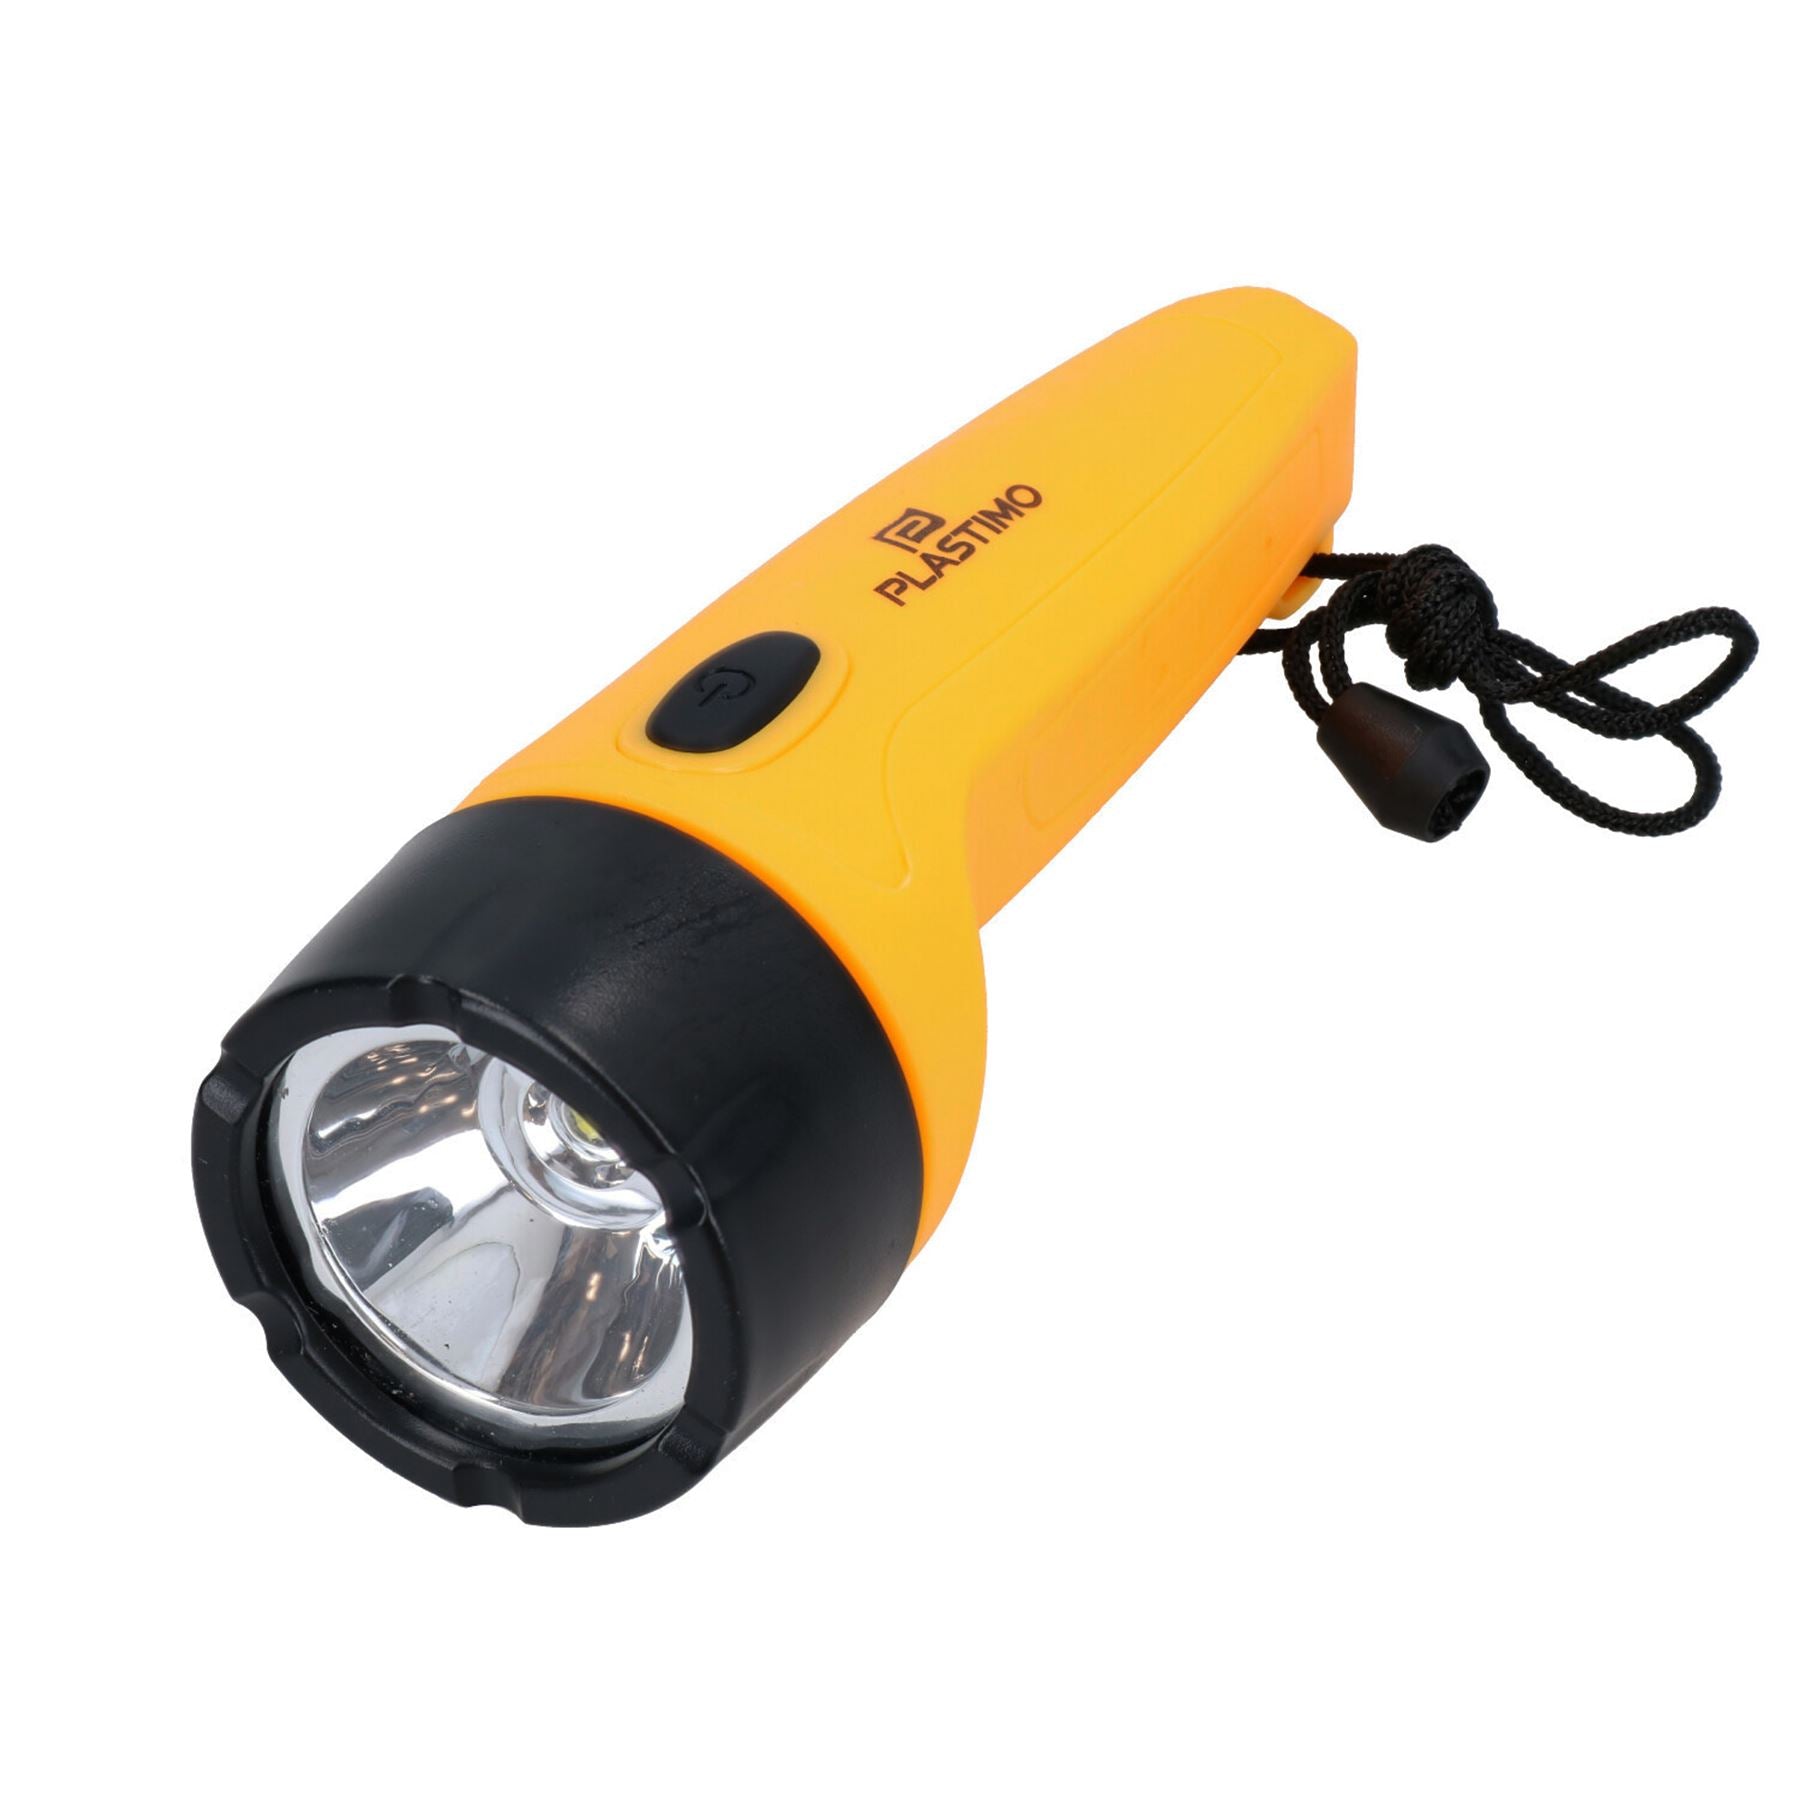 3 Pack Floating Marine Torch IPX7 Waterproof LED High Vis Flashlight by Plastimo